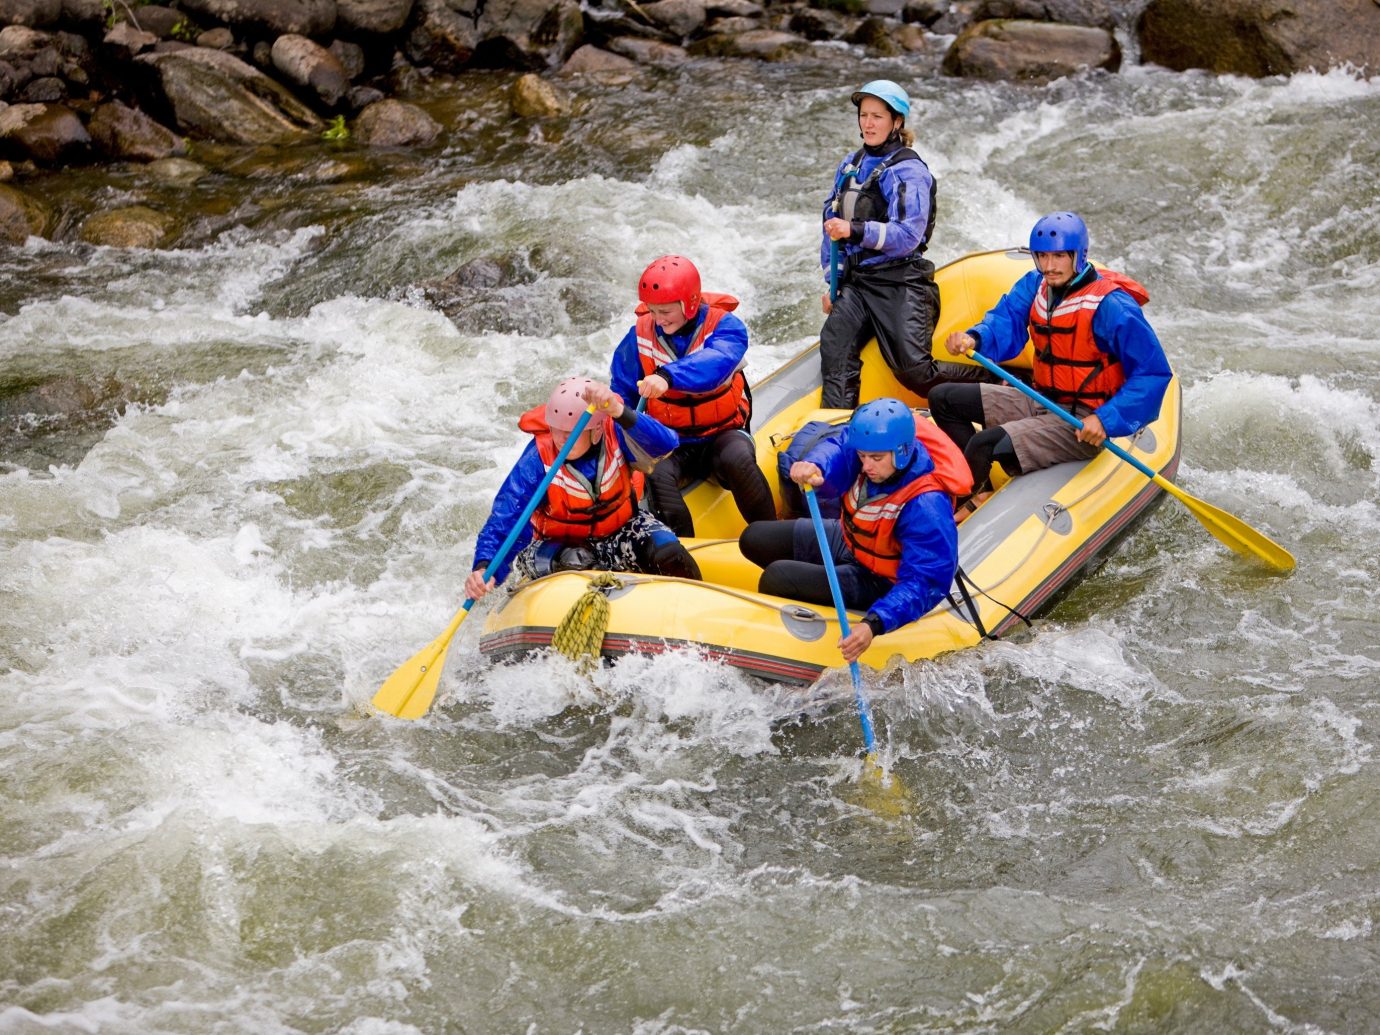 Health + Wellness Trip Ideas outdoor Raft water rafting sports water sport riding watercraft River yellow rapid boating recreation transport outdoor recreation extreme sport whitewater kayaking wave